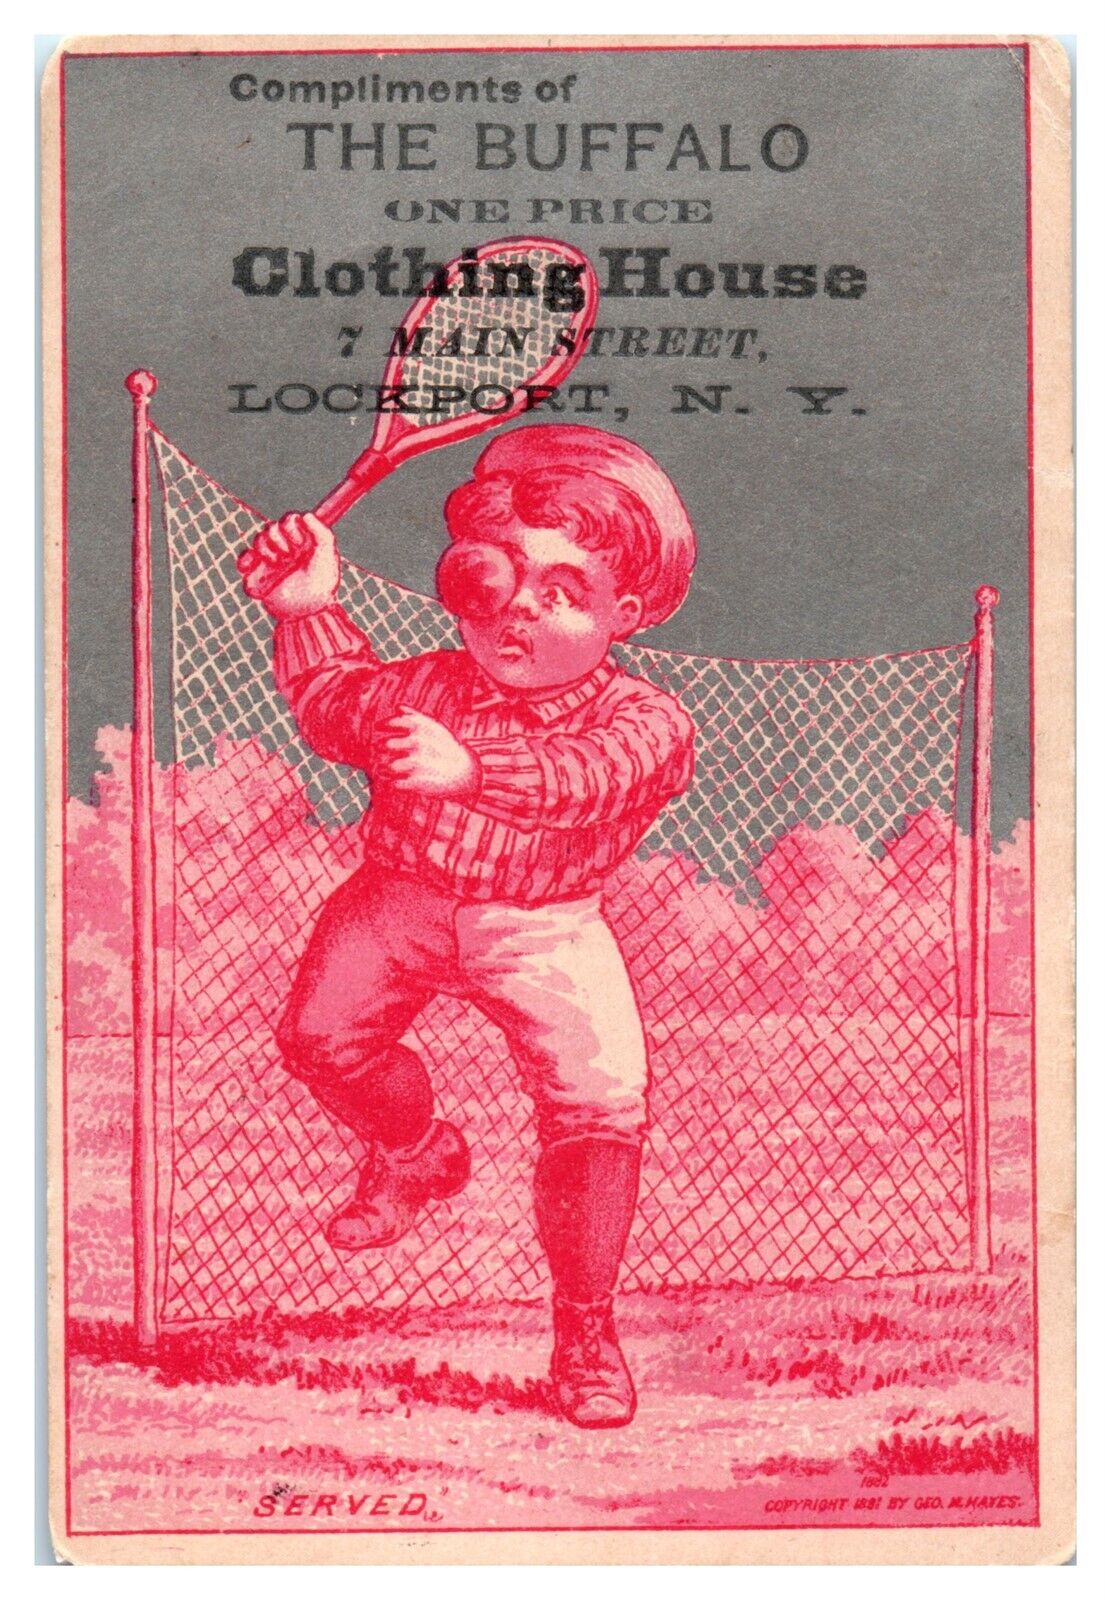 Buffalo One Price Clothing House Tennis Accident Lockport, NY Trade Card A1